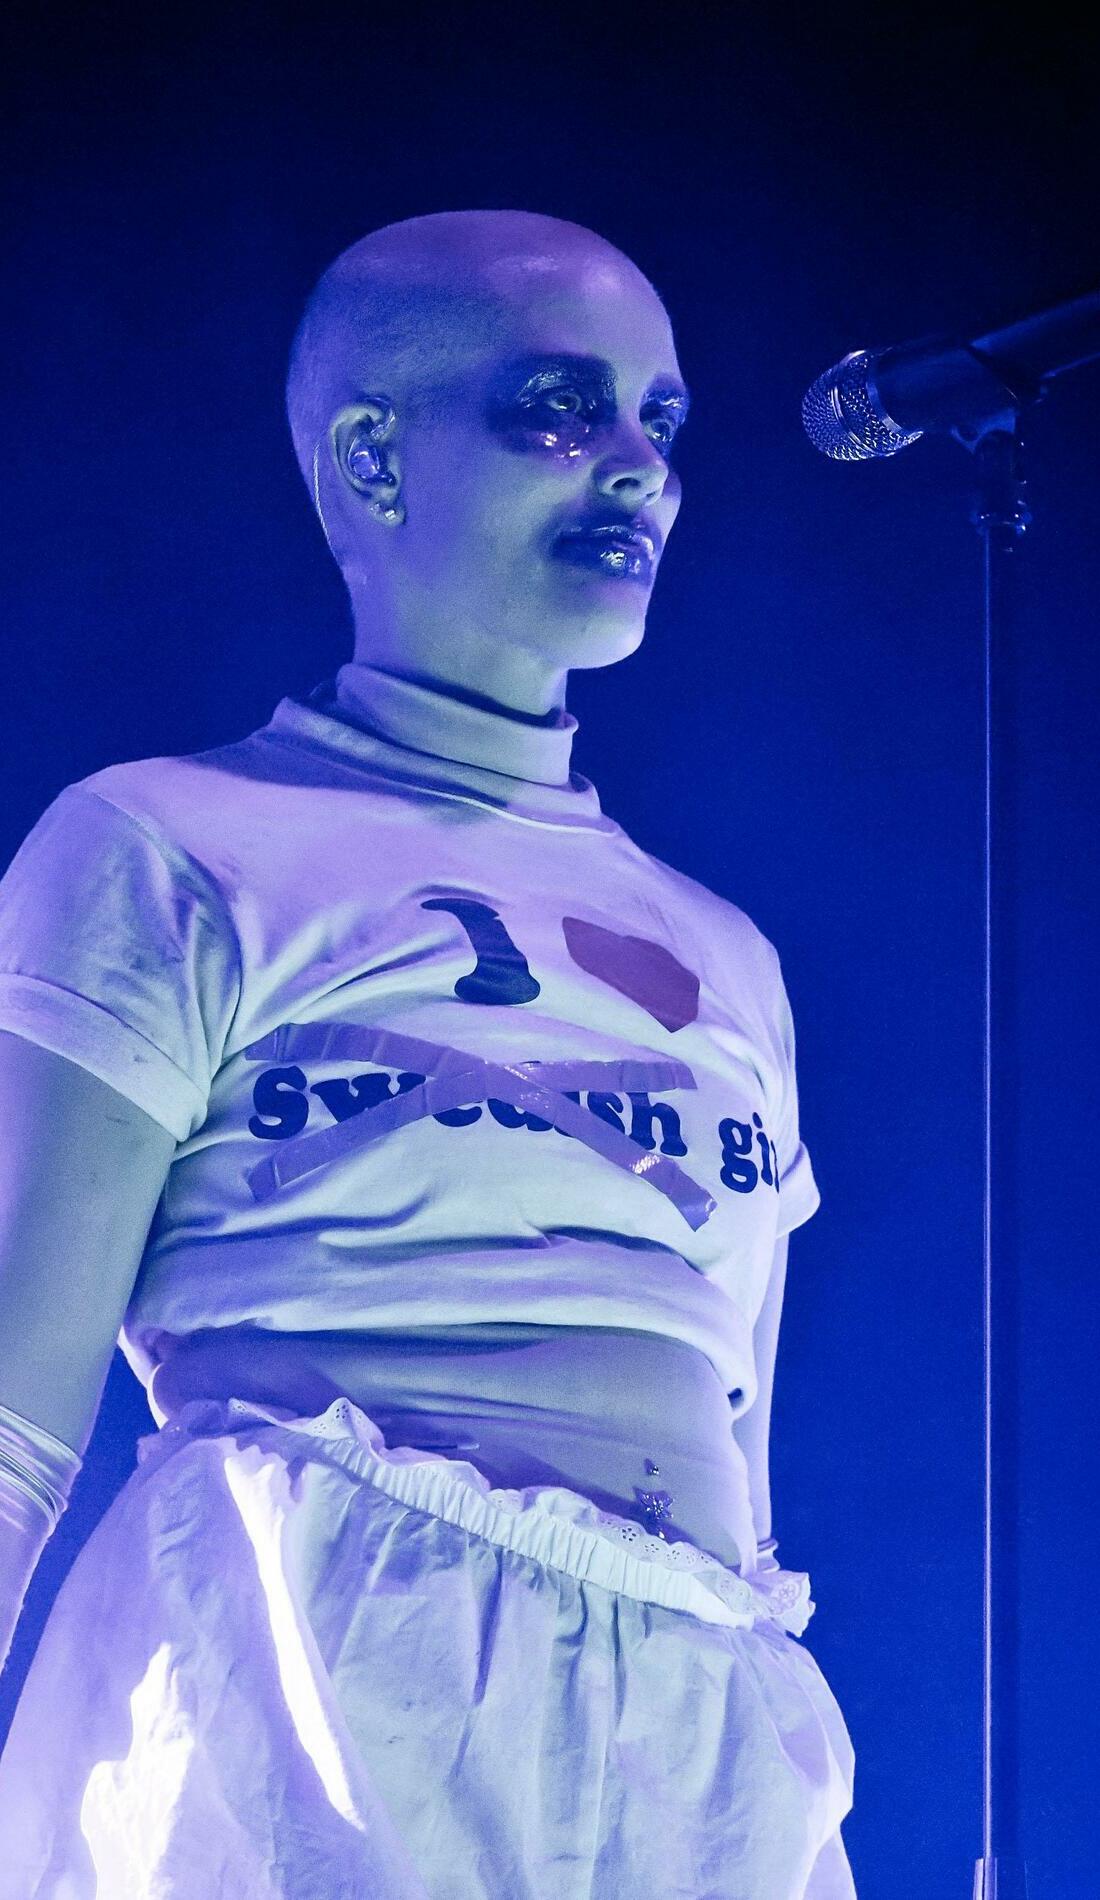 A Fever Ray live event